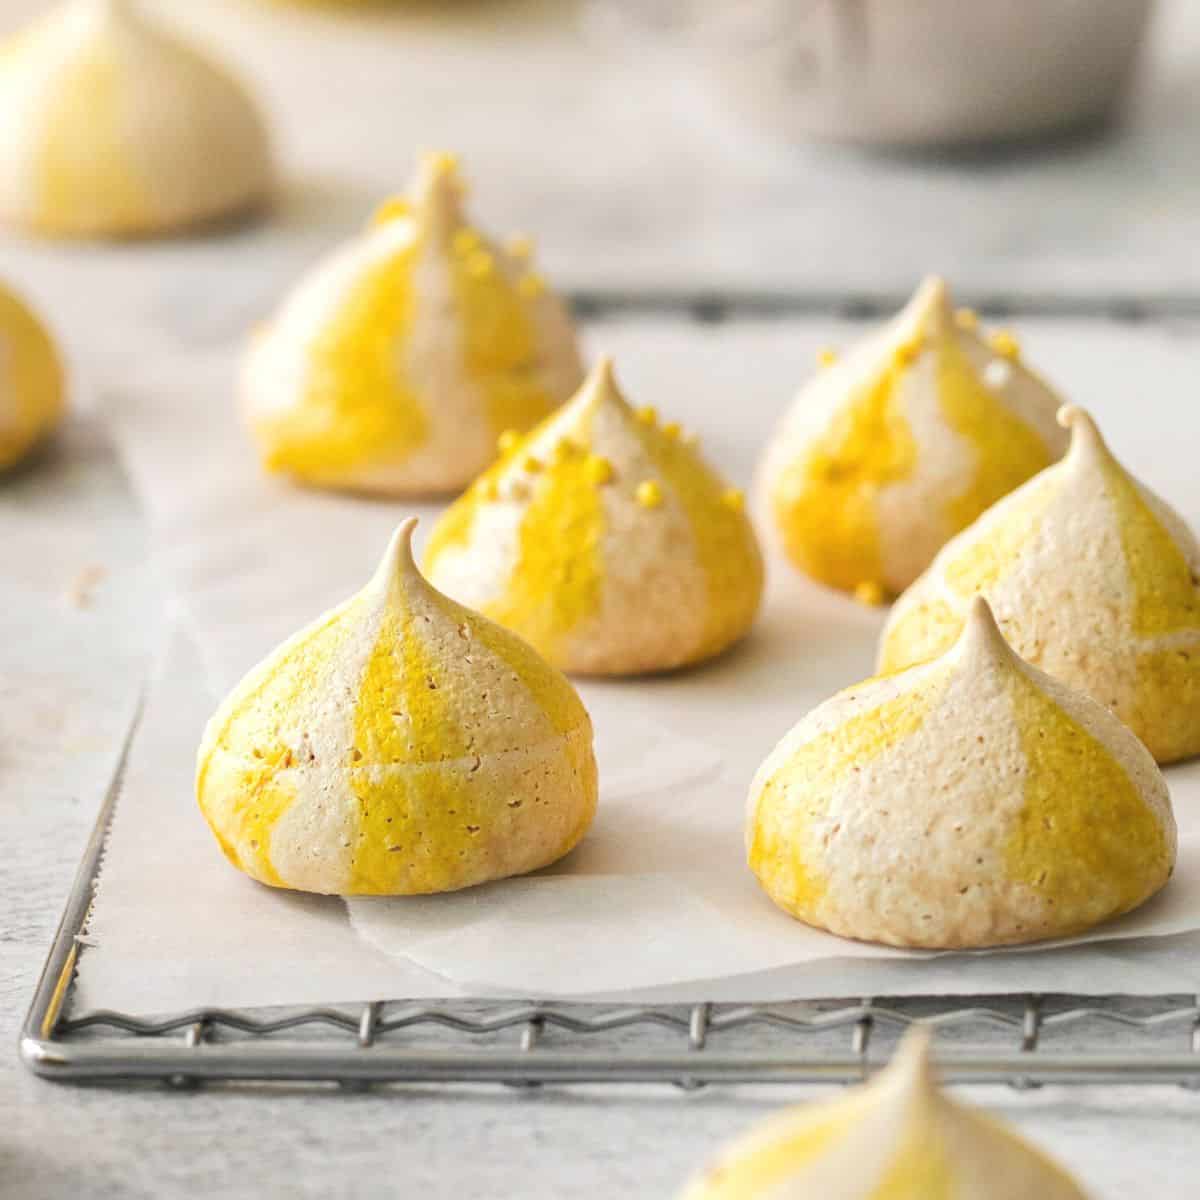 Sugar Free Lemon Meringue Cookies, a simple and delicious lemon flavored cookie recipe made with no added sugar. Keto, low carb, gluten free.